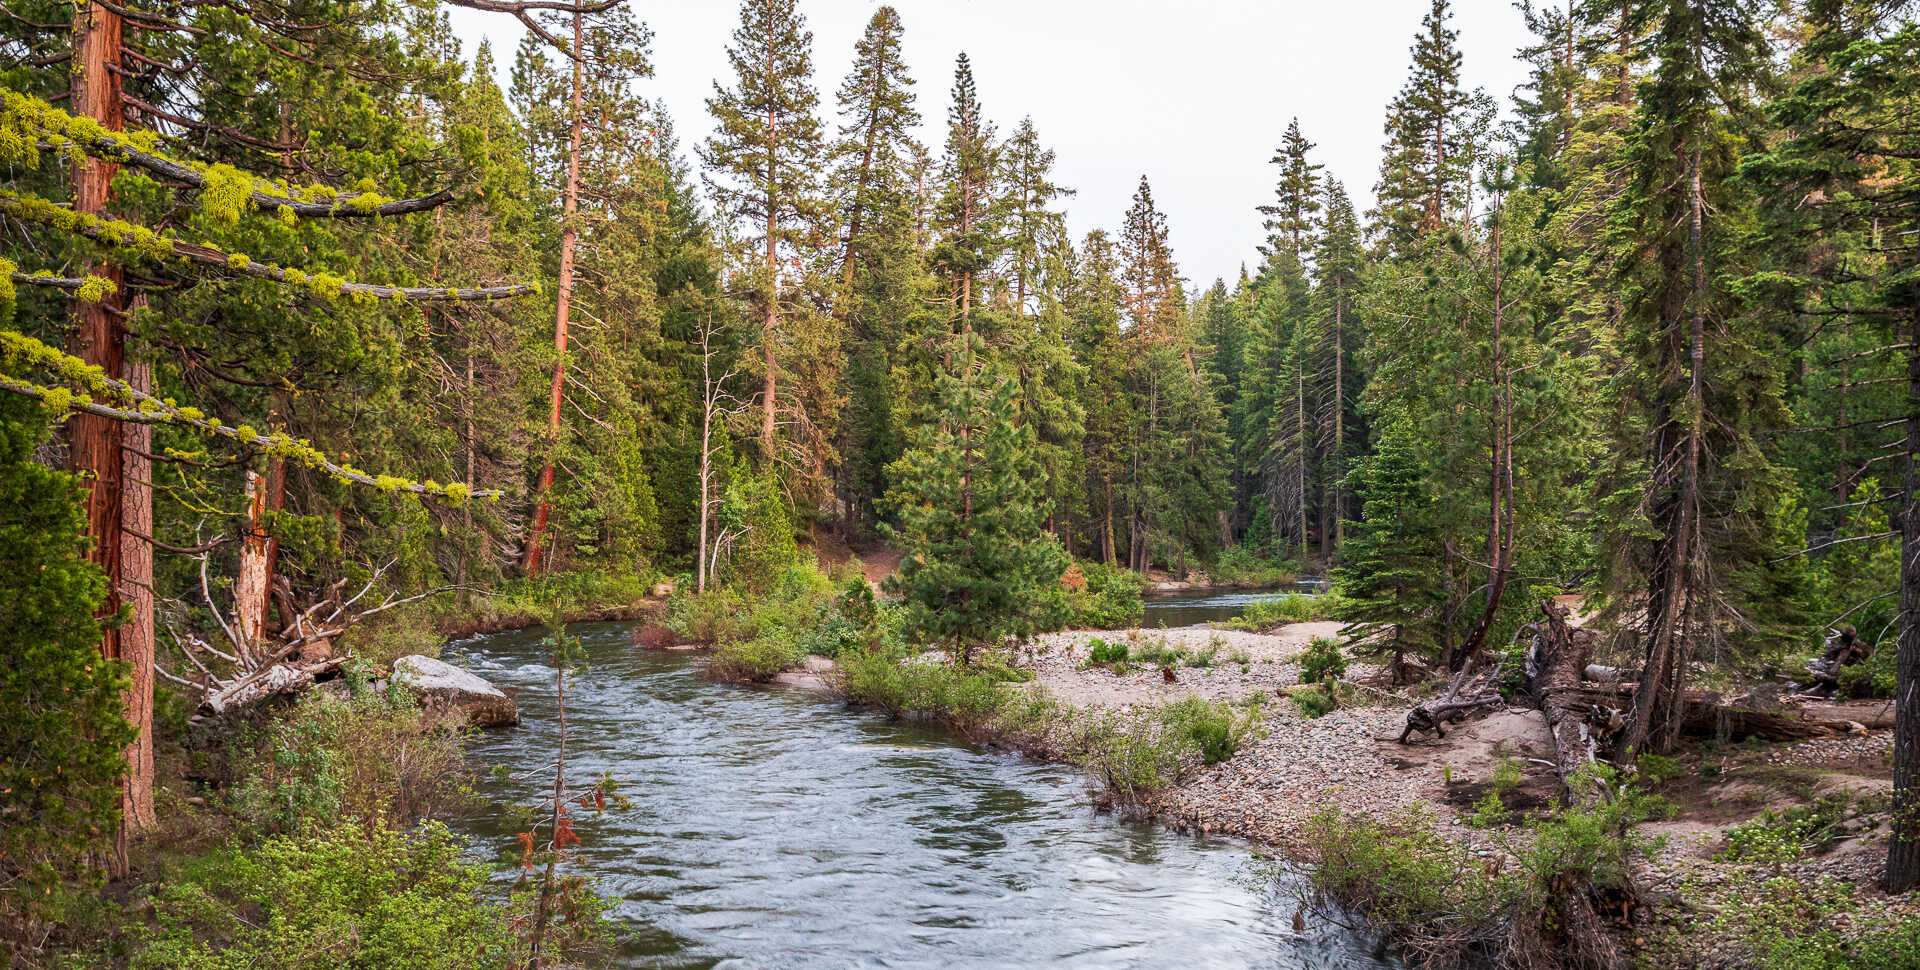 View of the Silver Fork branch of the American River at the China Flat campground in the Sierras